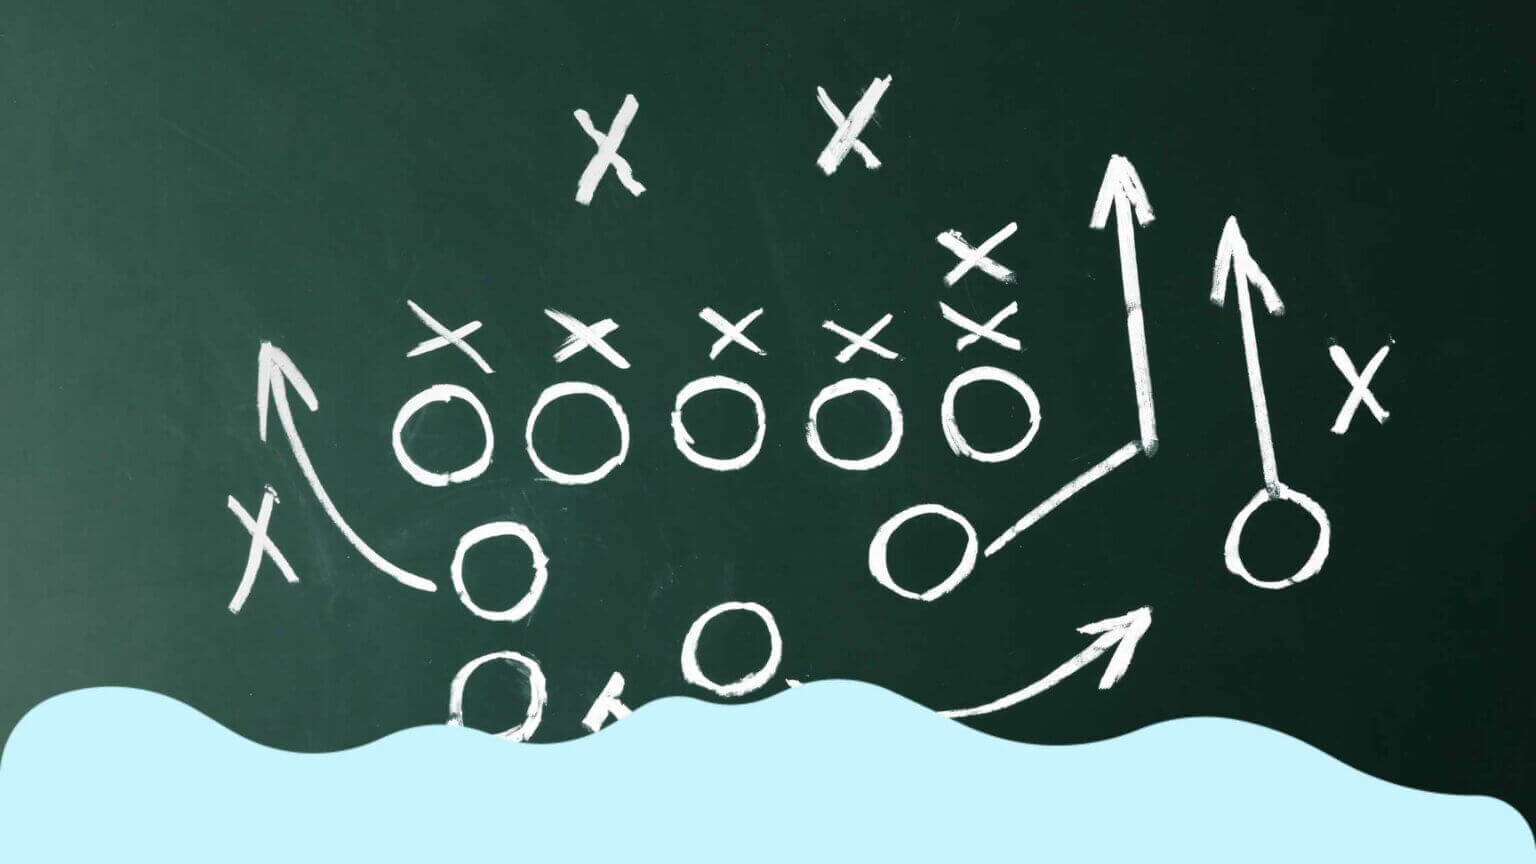 A blackboard displaying a simulated football game, utilized as part of an innovative employee training strategy.